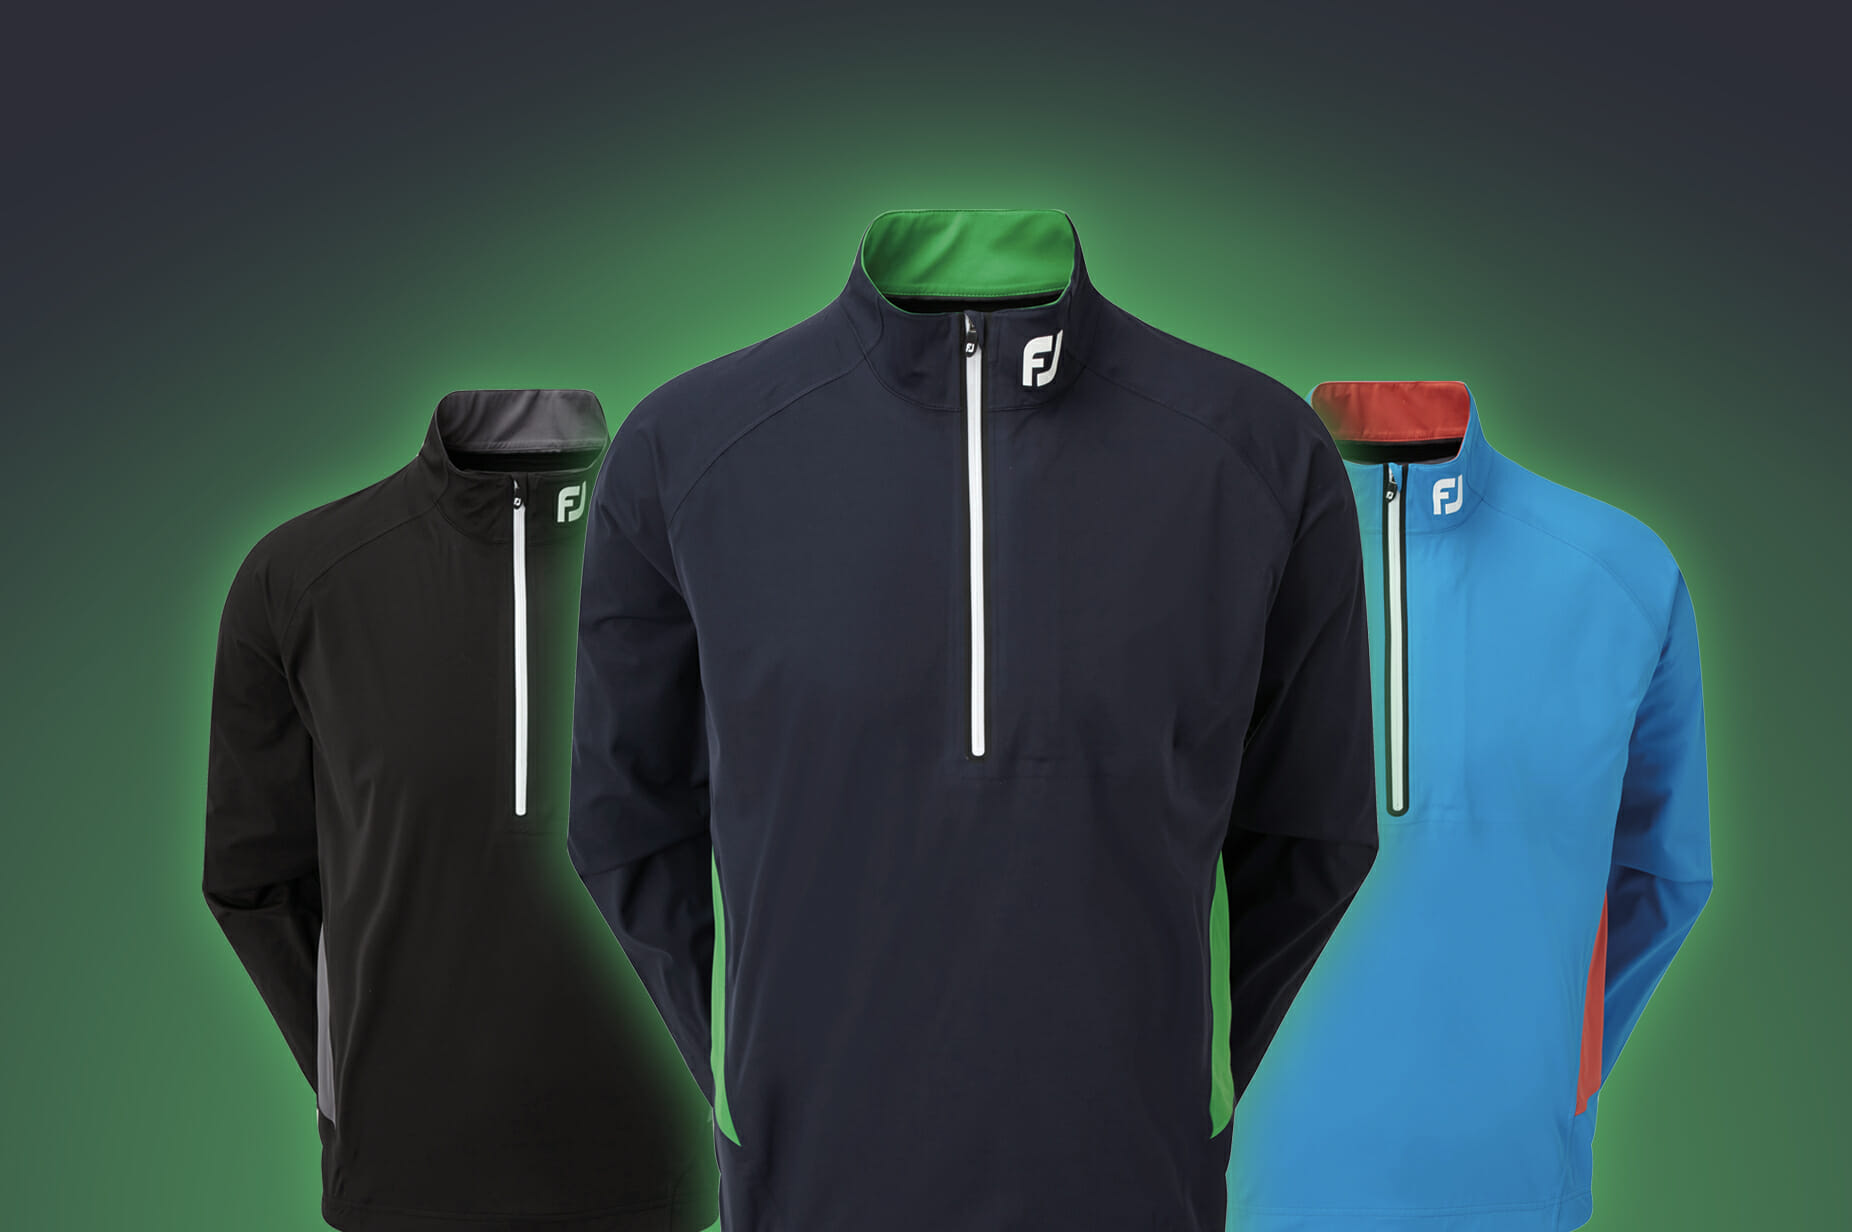 FootJoy’s new HydroKnit makes every day playable